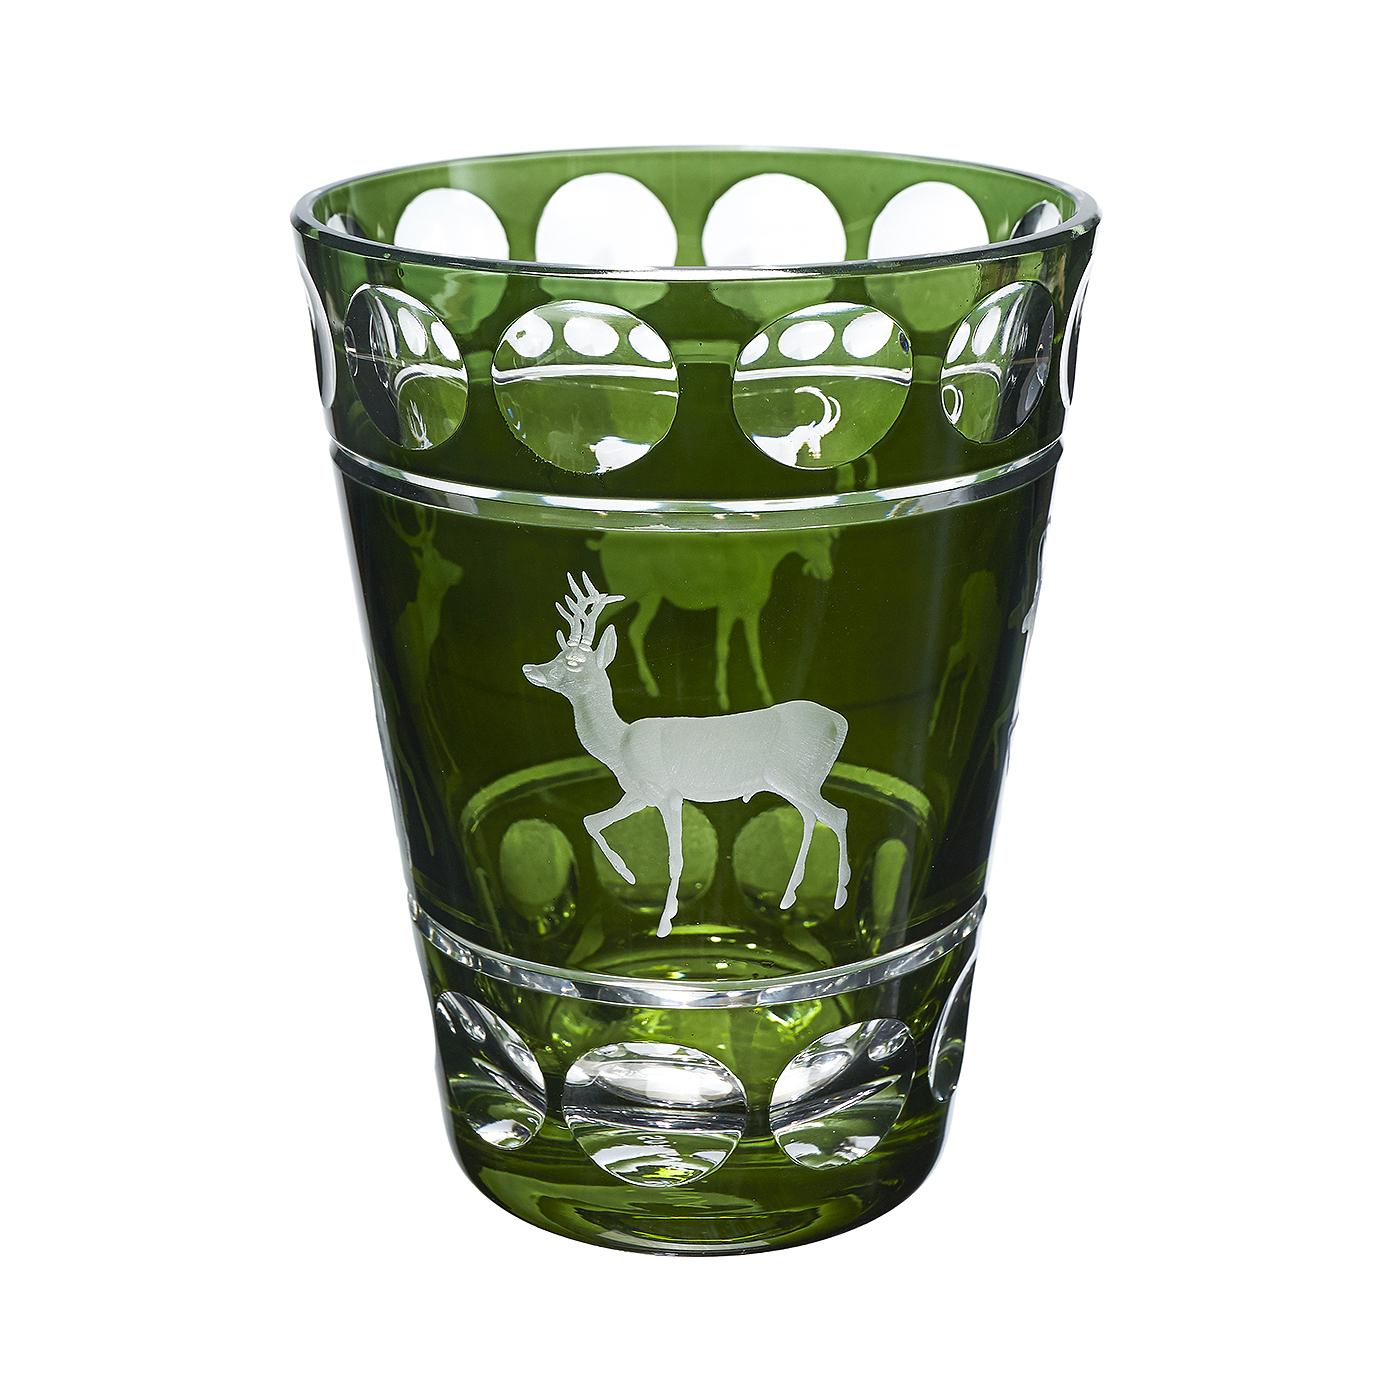 Handblown crystal vase in green glass with a hunting scene. The decor is a hunting decor with 4 hands-free engraved animals in natrualistic style. Completely handblown and hand-engraved in Bavaria/Germany. The glass here shown comes in dark green